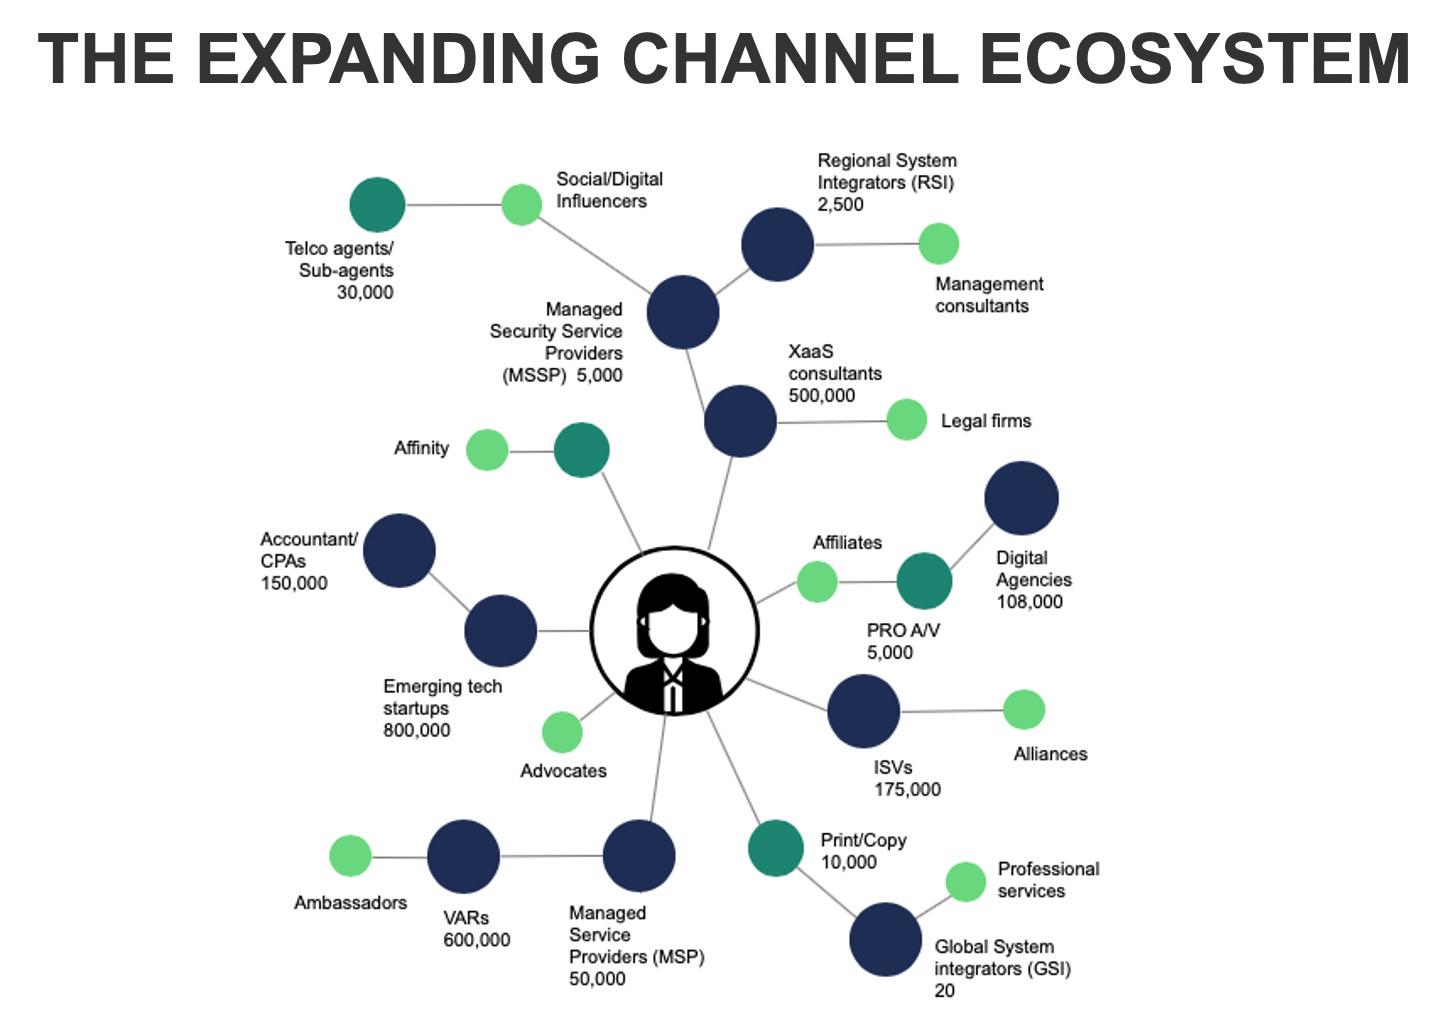 The Expanding channel ecosystem